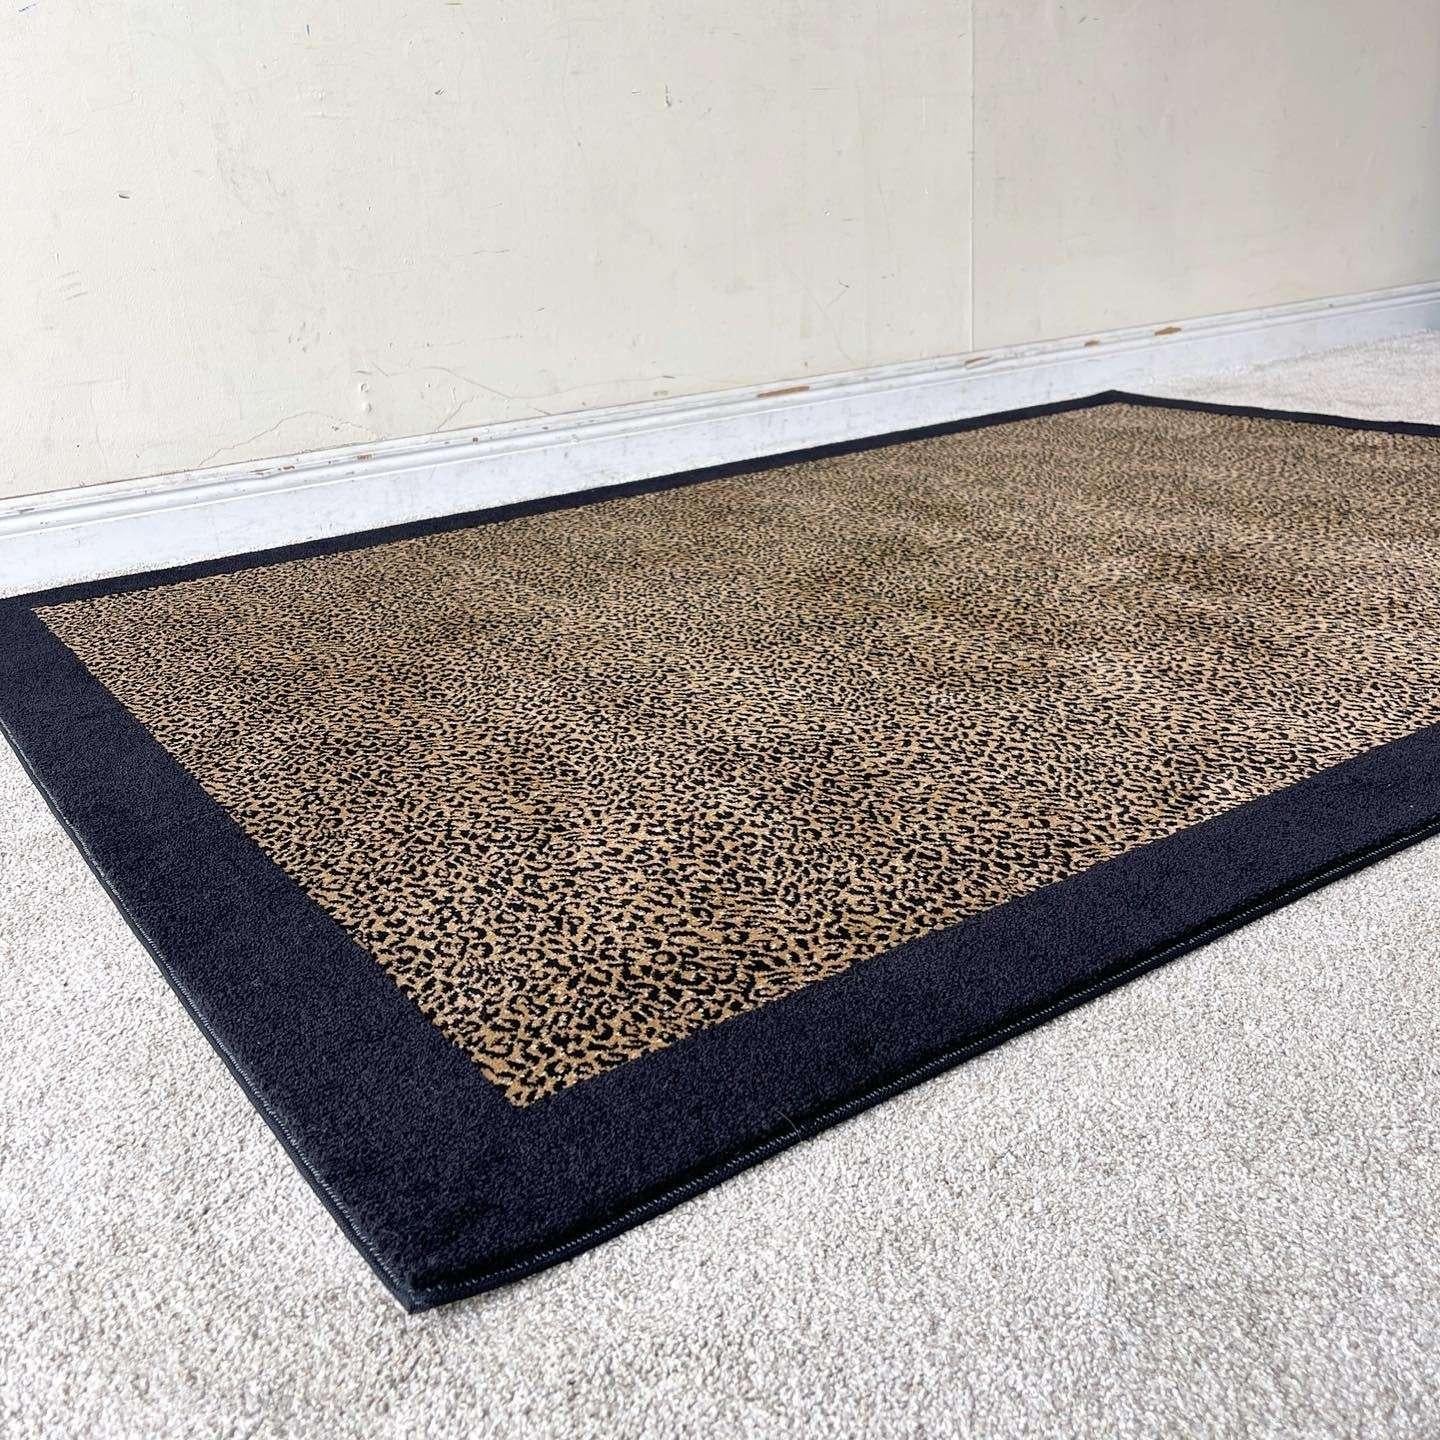 Amazing vintage postmodern rectangular area rug. Features a black outer edge with a leopard print interior.

Rug 12
